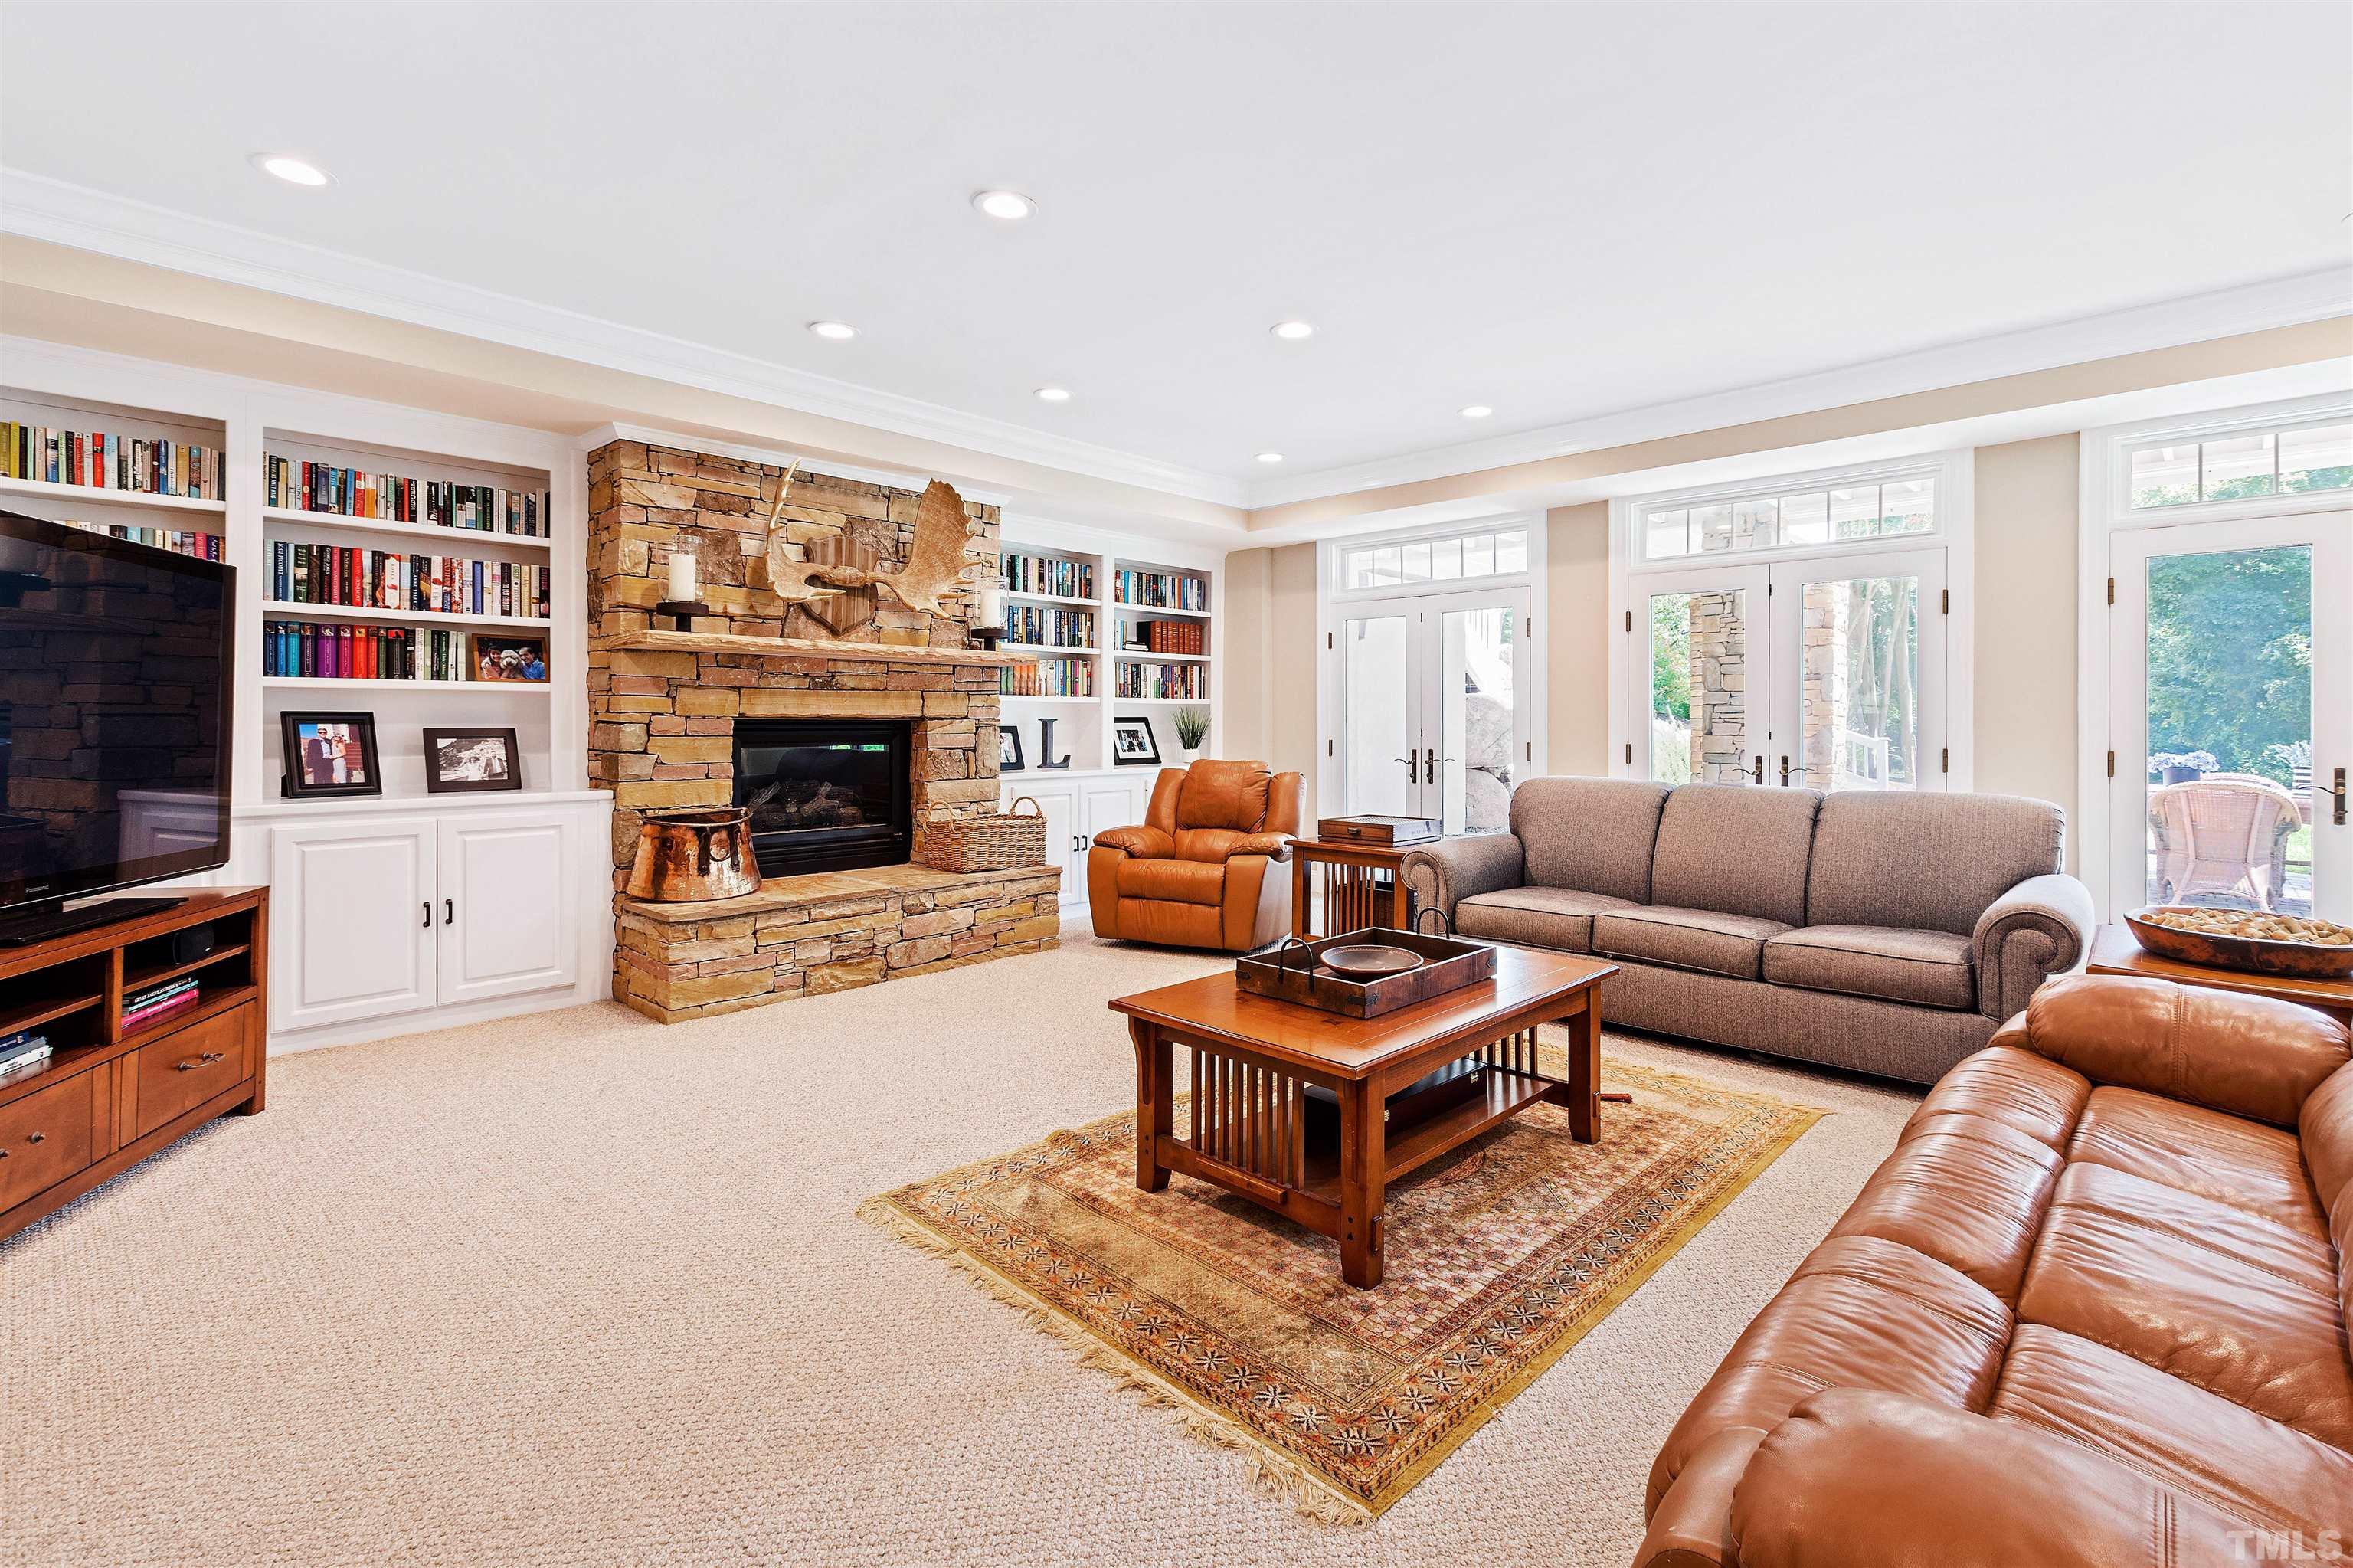 Fully carpeted, features bookshelves, stone fireplace, access to lower patio.